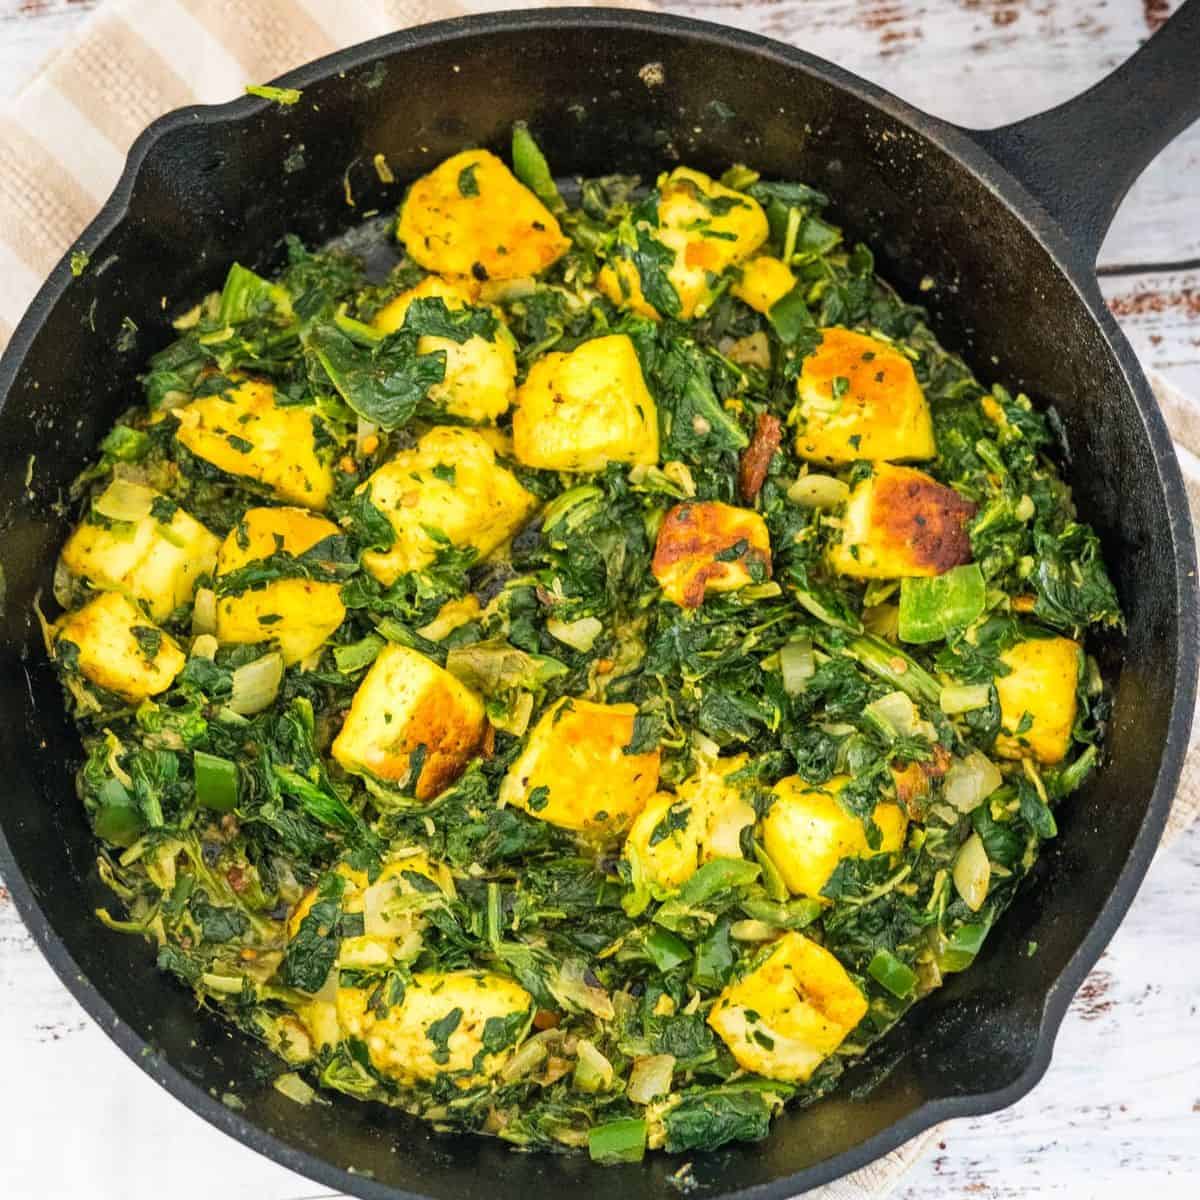 Sautéed paneer and spinach in a cast-iron skillet.